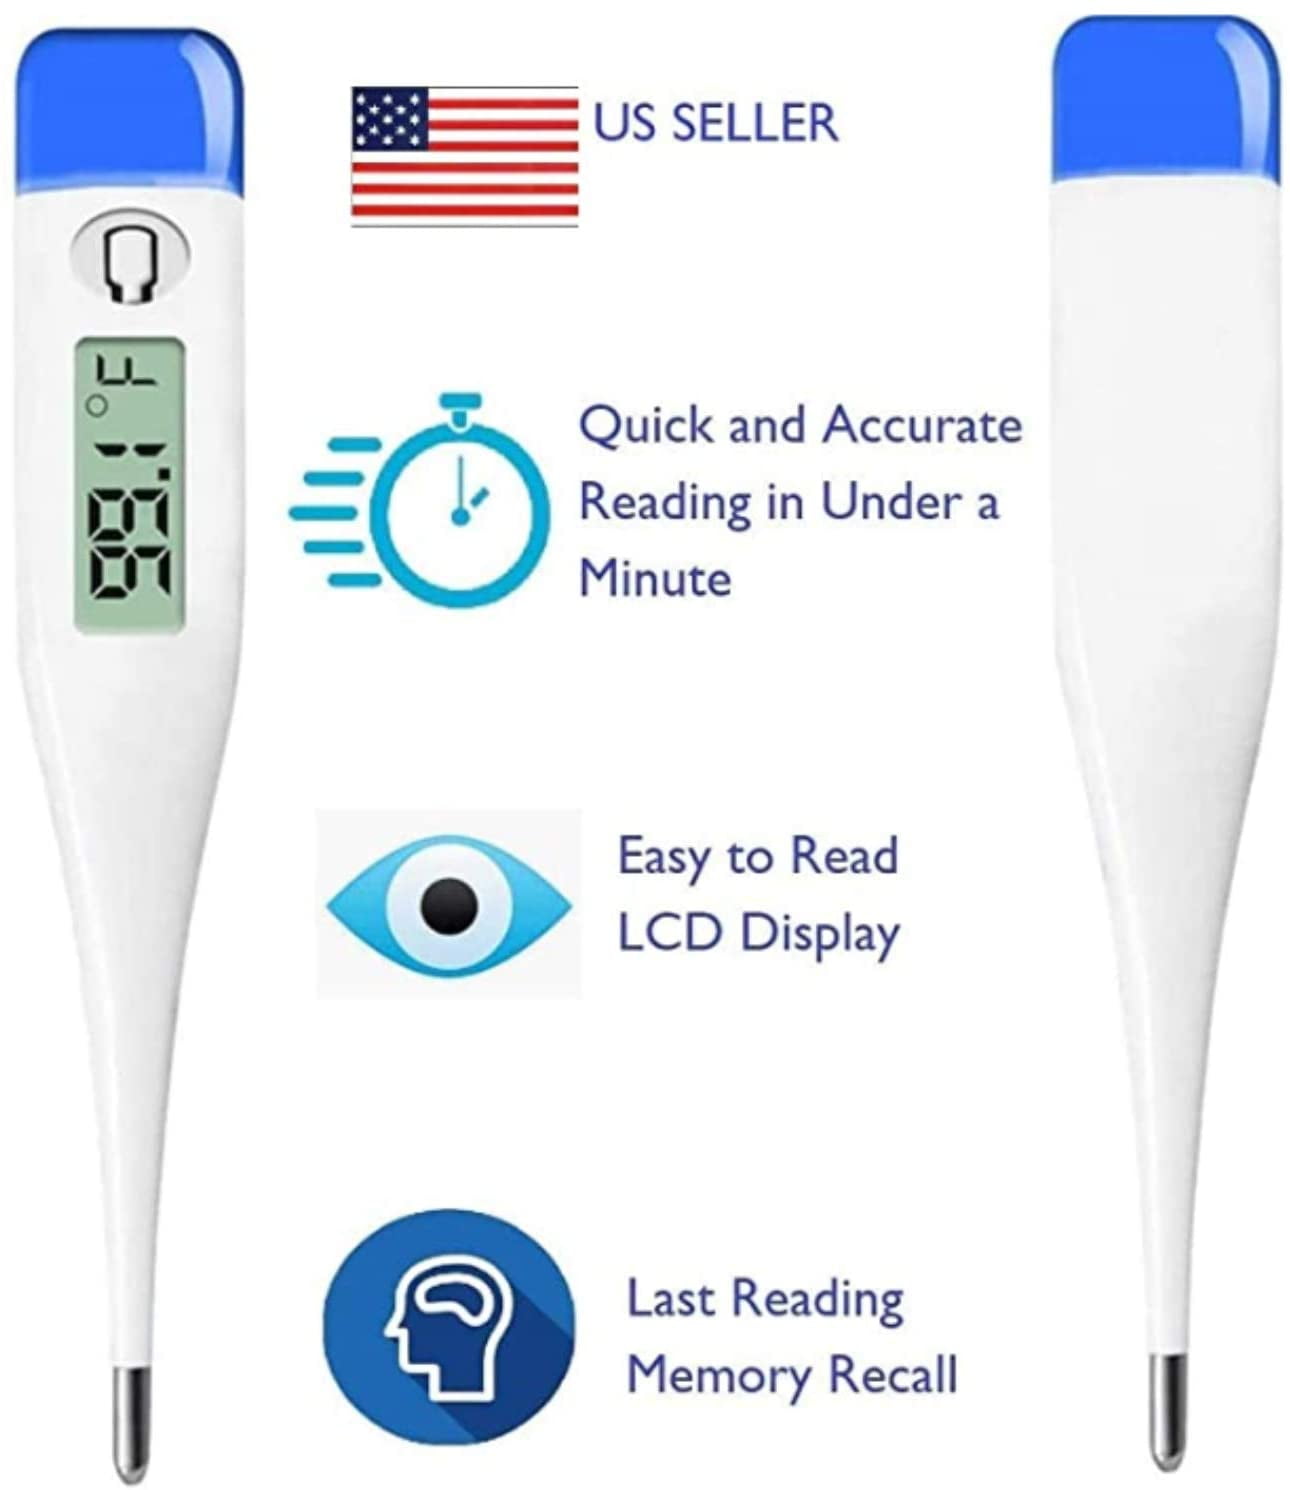 20s Underarm Fast Read Temperature Meter for Infants Babies Toddlers Kids Oral Temperature Thermometer Gojiny Digital Body Thermometer 